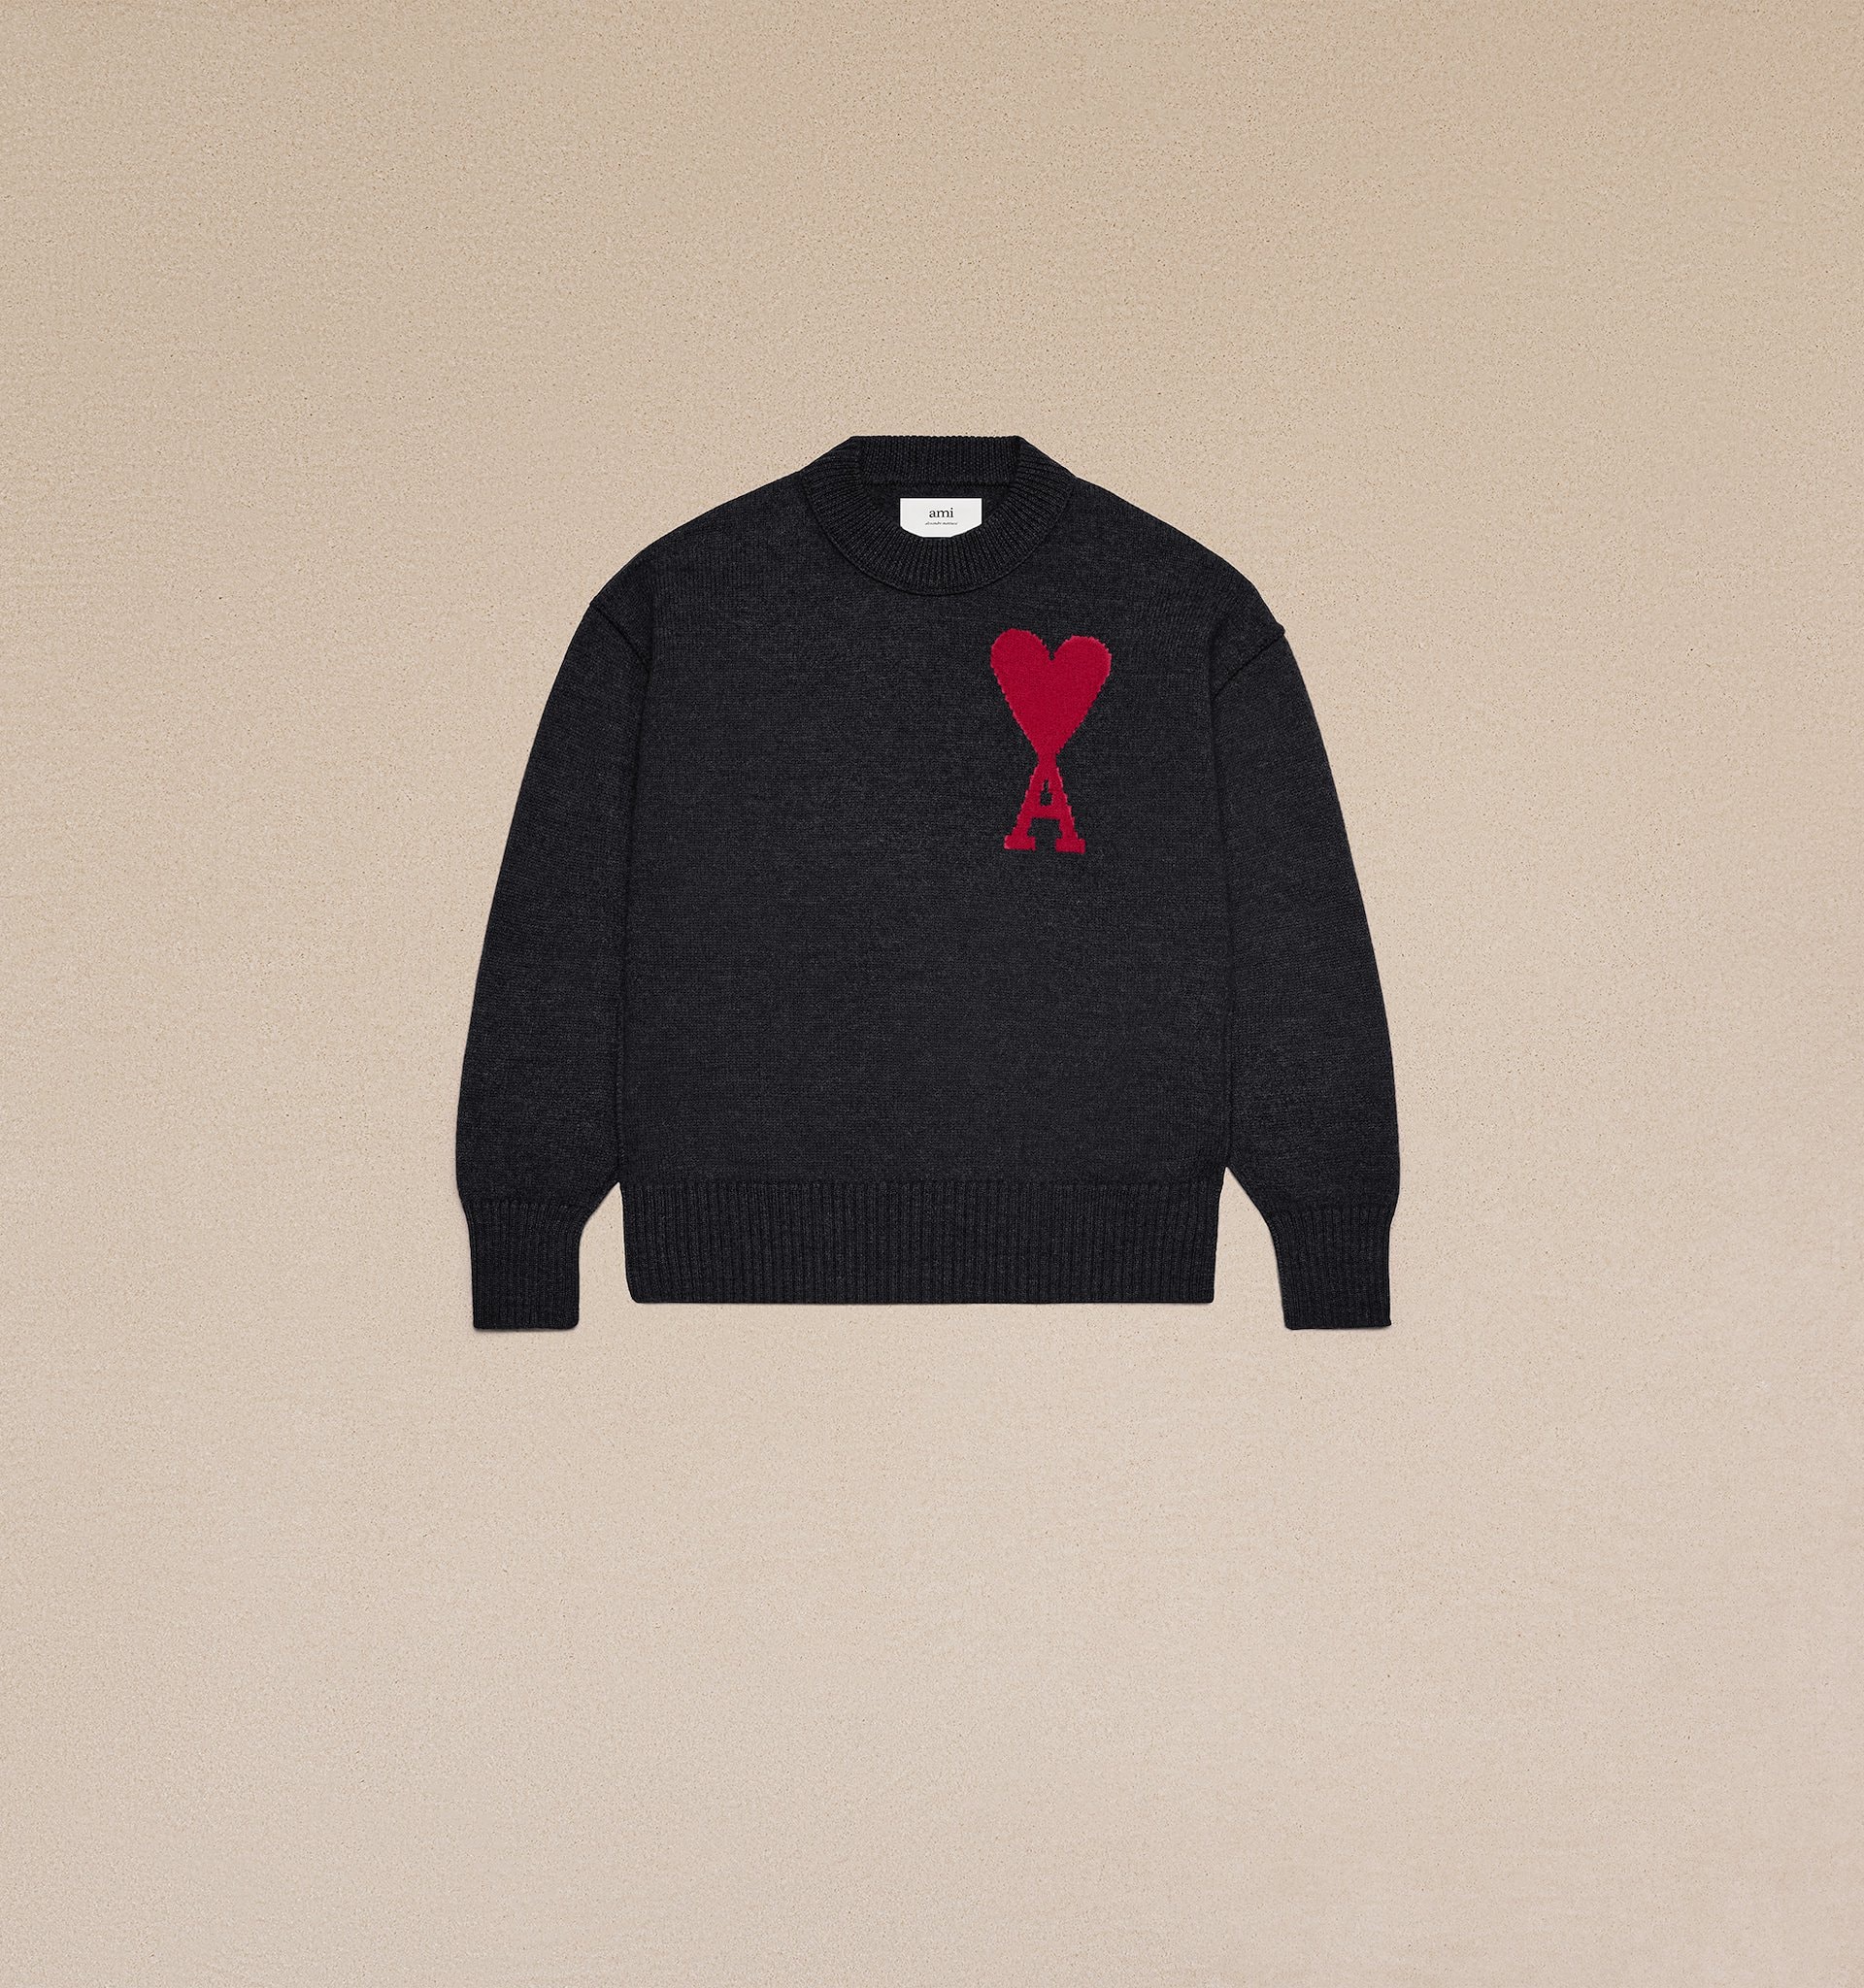 Red Adc Sweater Clothing In Black